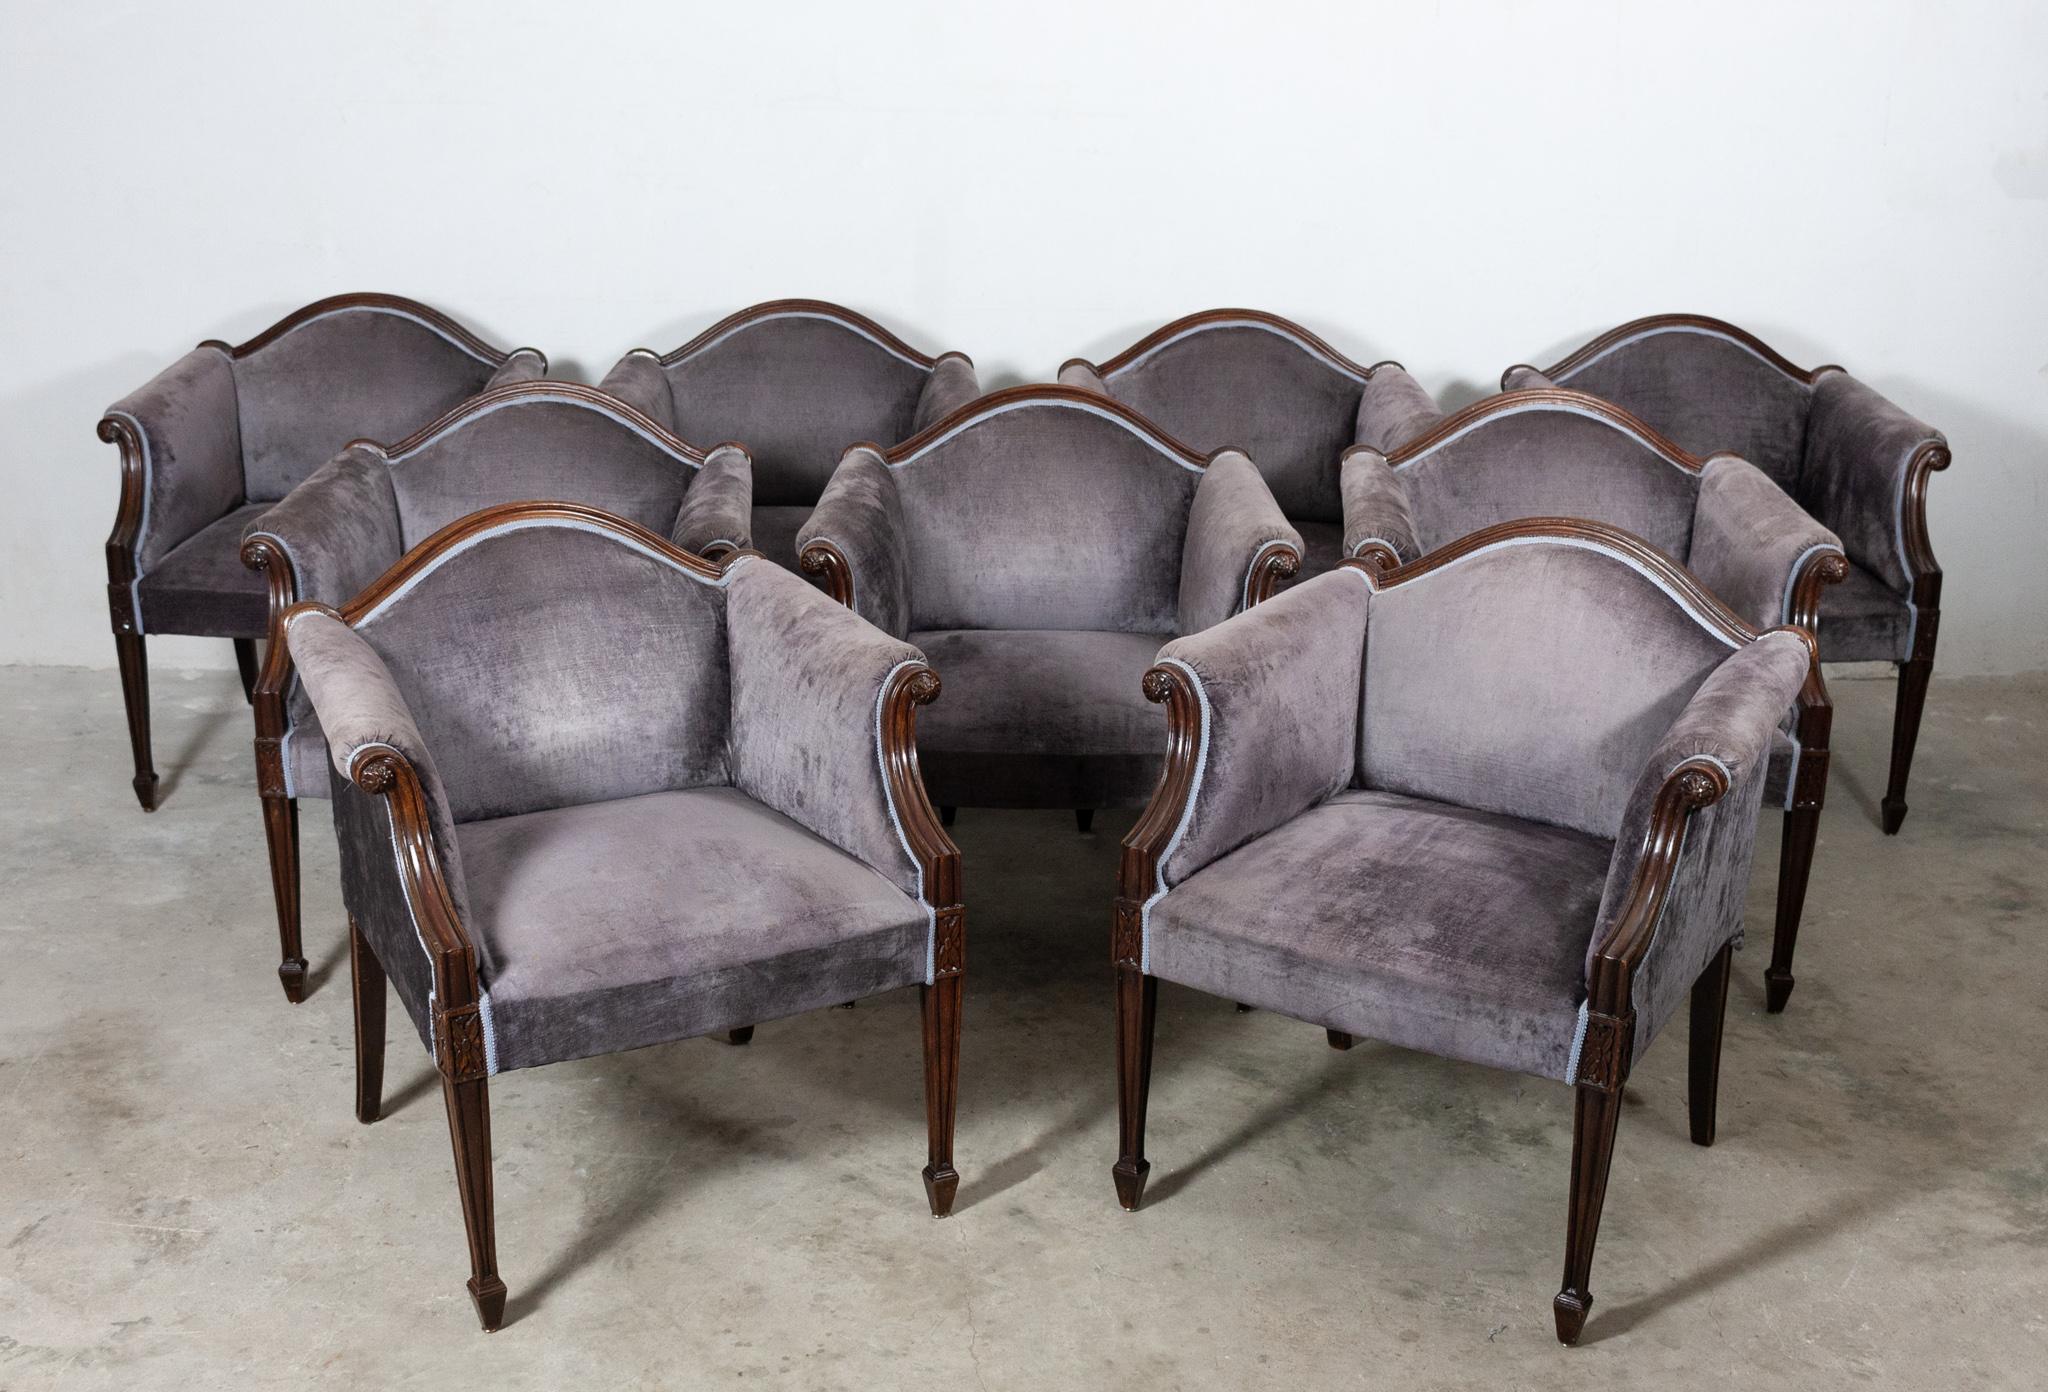 bergère Louis XV Style armchairs. Very unusual to find 8 pieces of this wonderful chairs. I love the shape off this chairs. Upholstery in a Purple velvet. Inner springs. Good construction. Nice carving. Ideal for Hotel lobby. Grand cafe. Ore a Club.